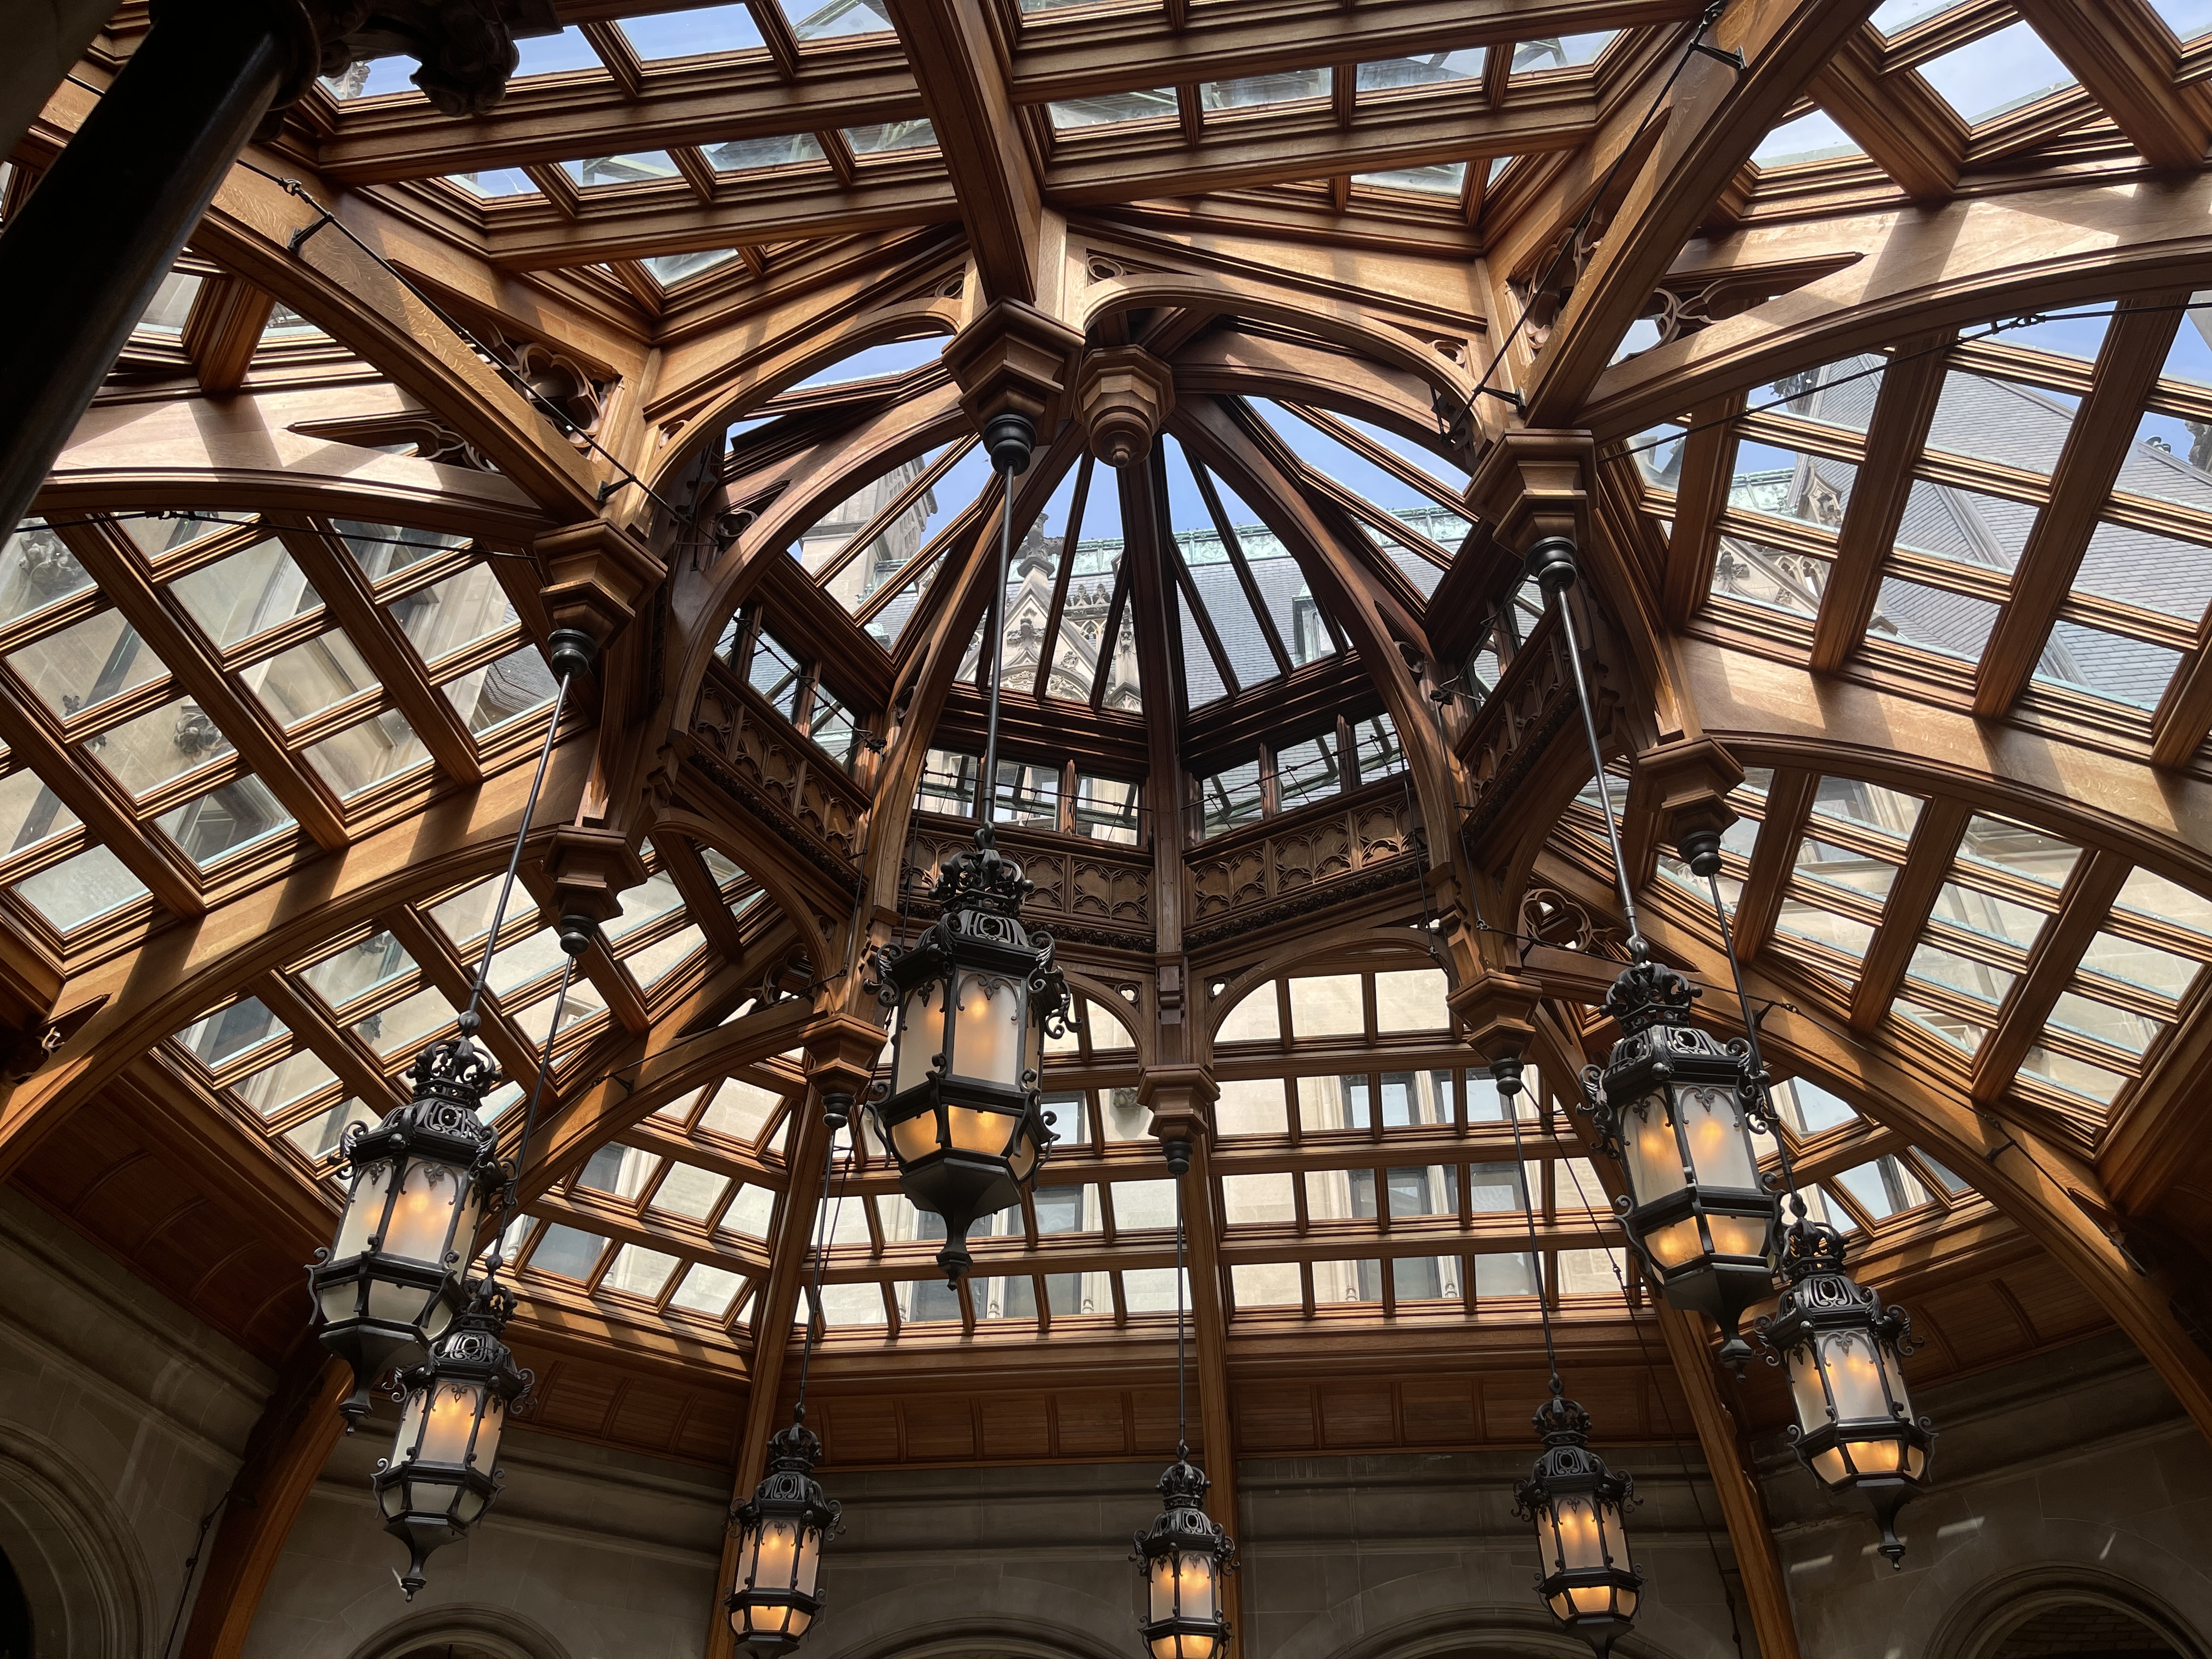 The wood and glass ceiling of the indoor garden at Biltmore House in Asheville, North Carolina